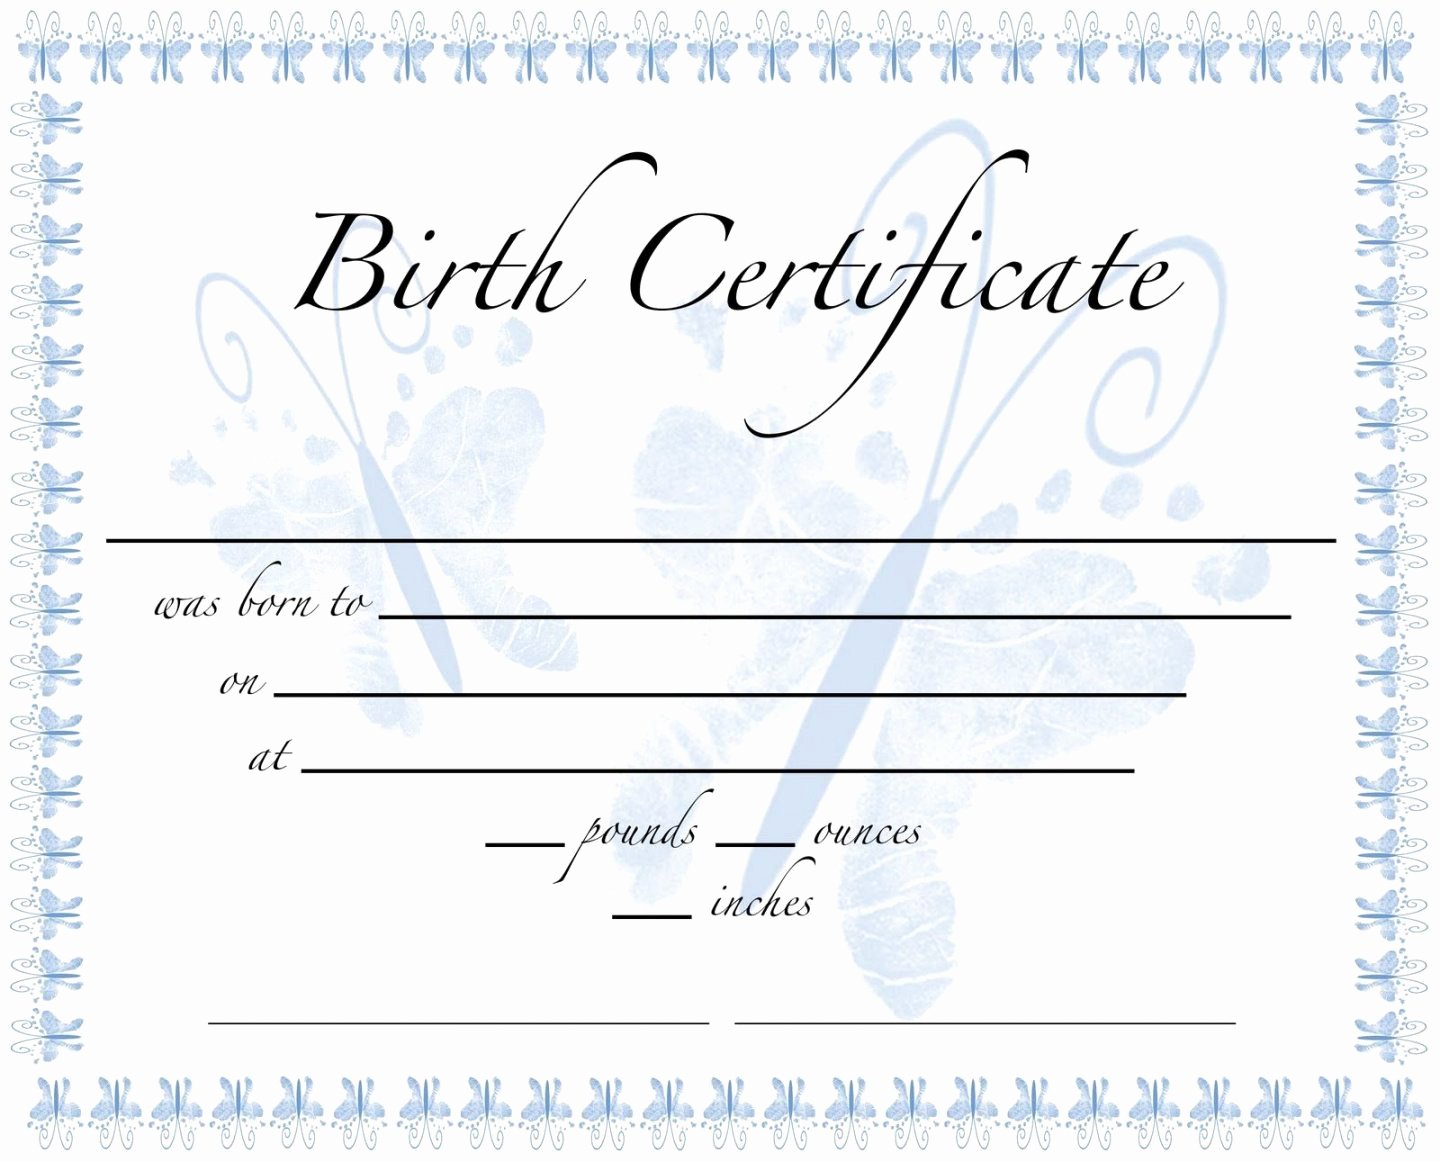 Create A Birth Certificate for School Project Luxury Puppy Birth Certificate Template